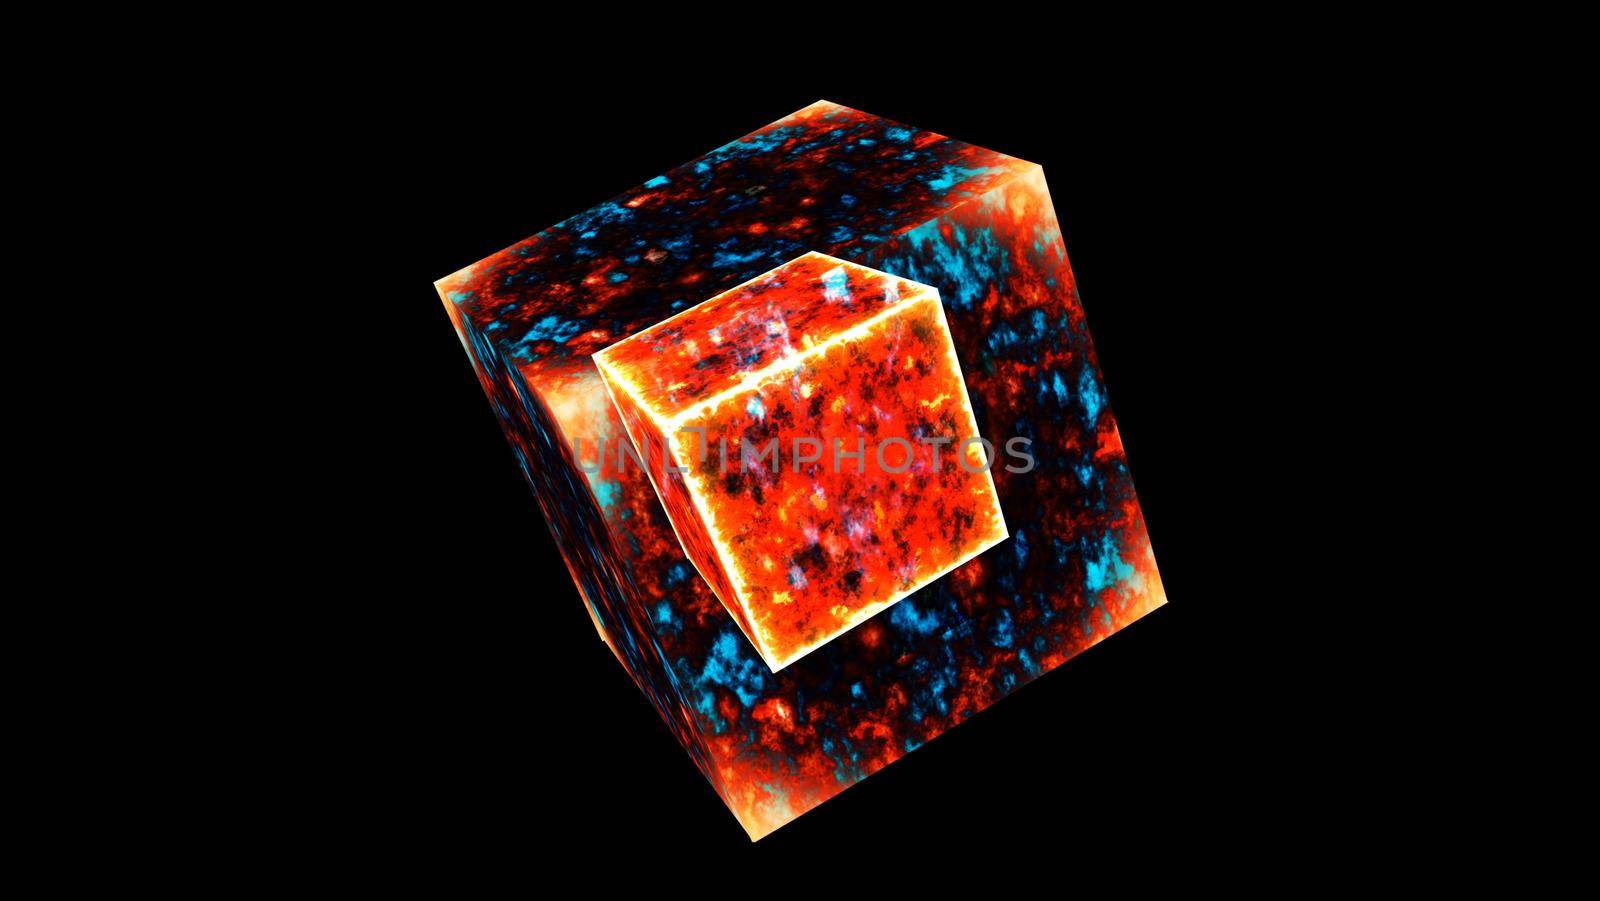 Eternal flame power overwhelming cube mystery energy surface and powerful eternal cube fire core by Darkfox